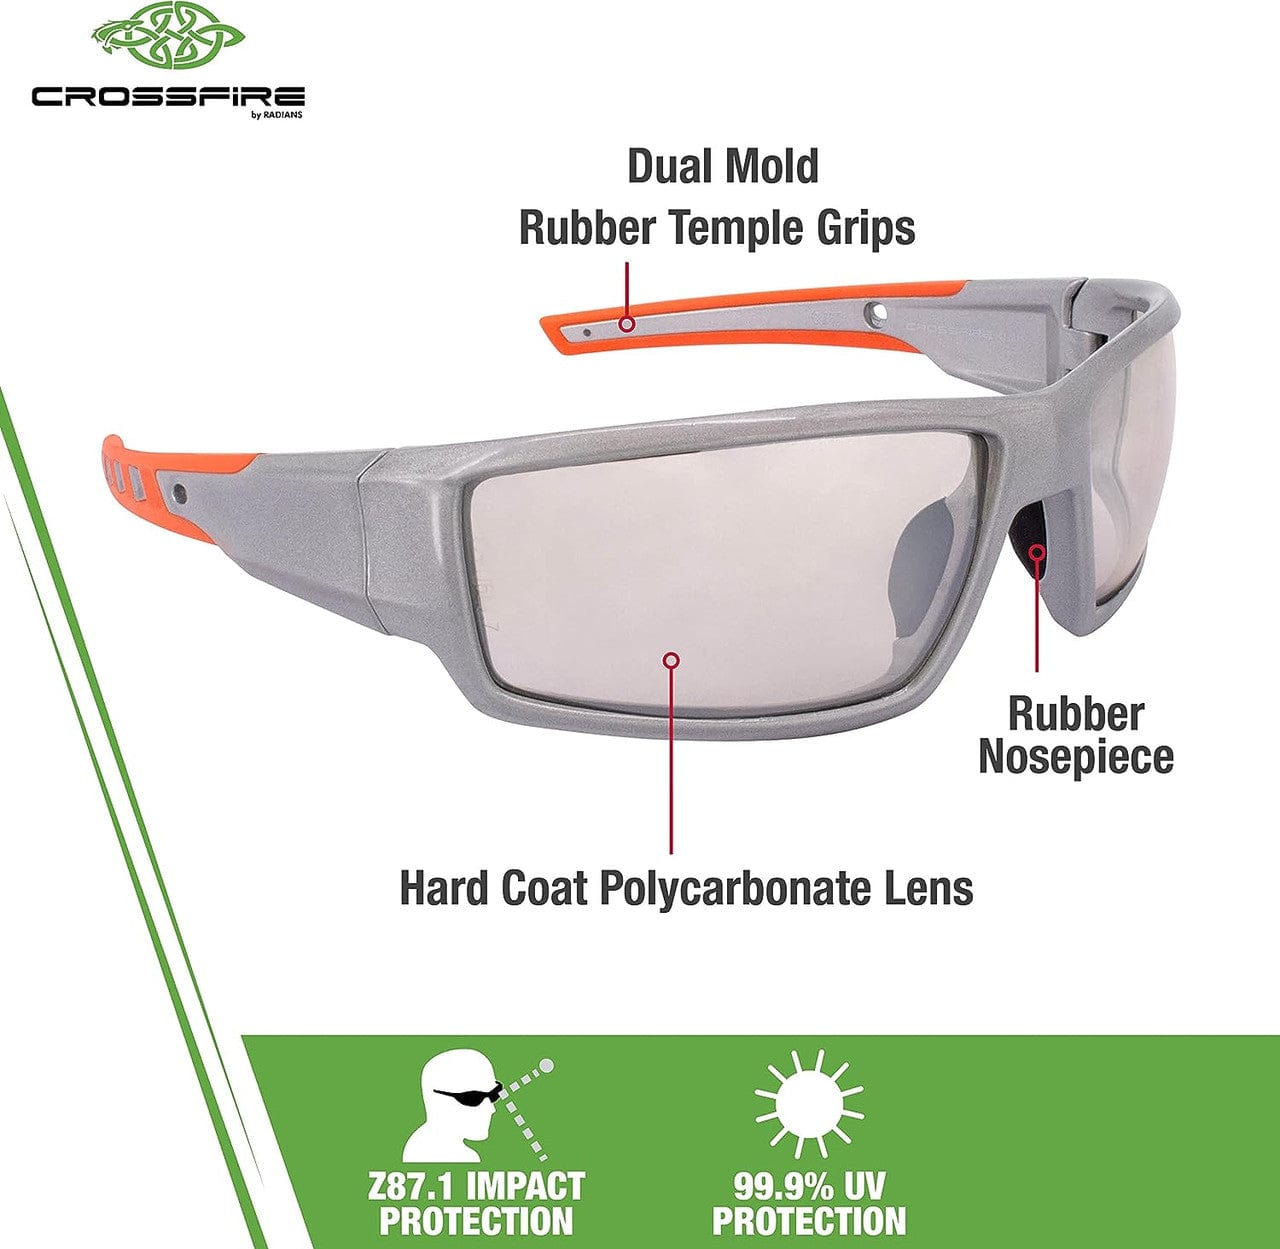 Crossfire Cumulus 412215 Safety Glasses Key Features